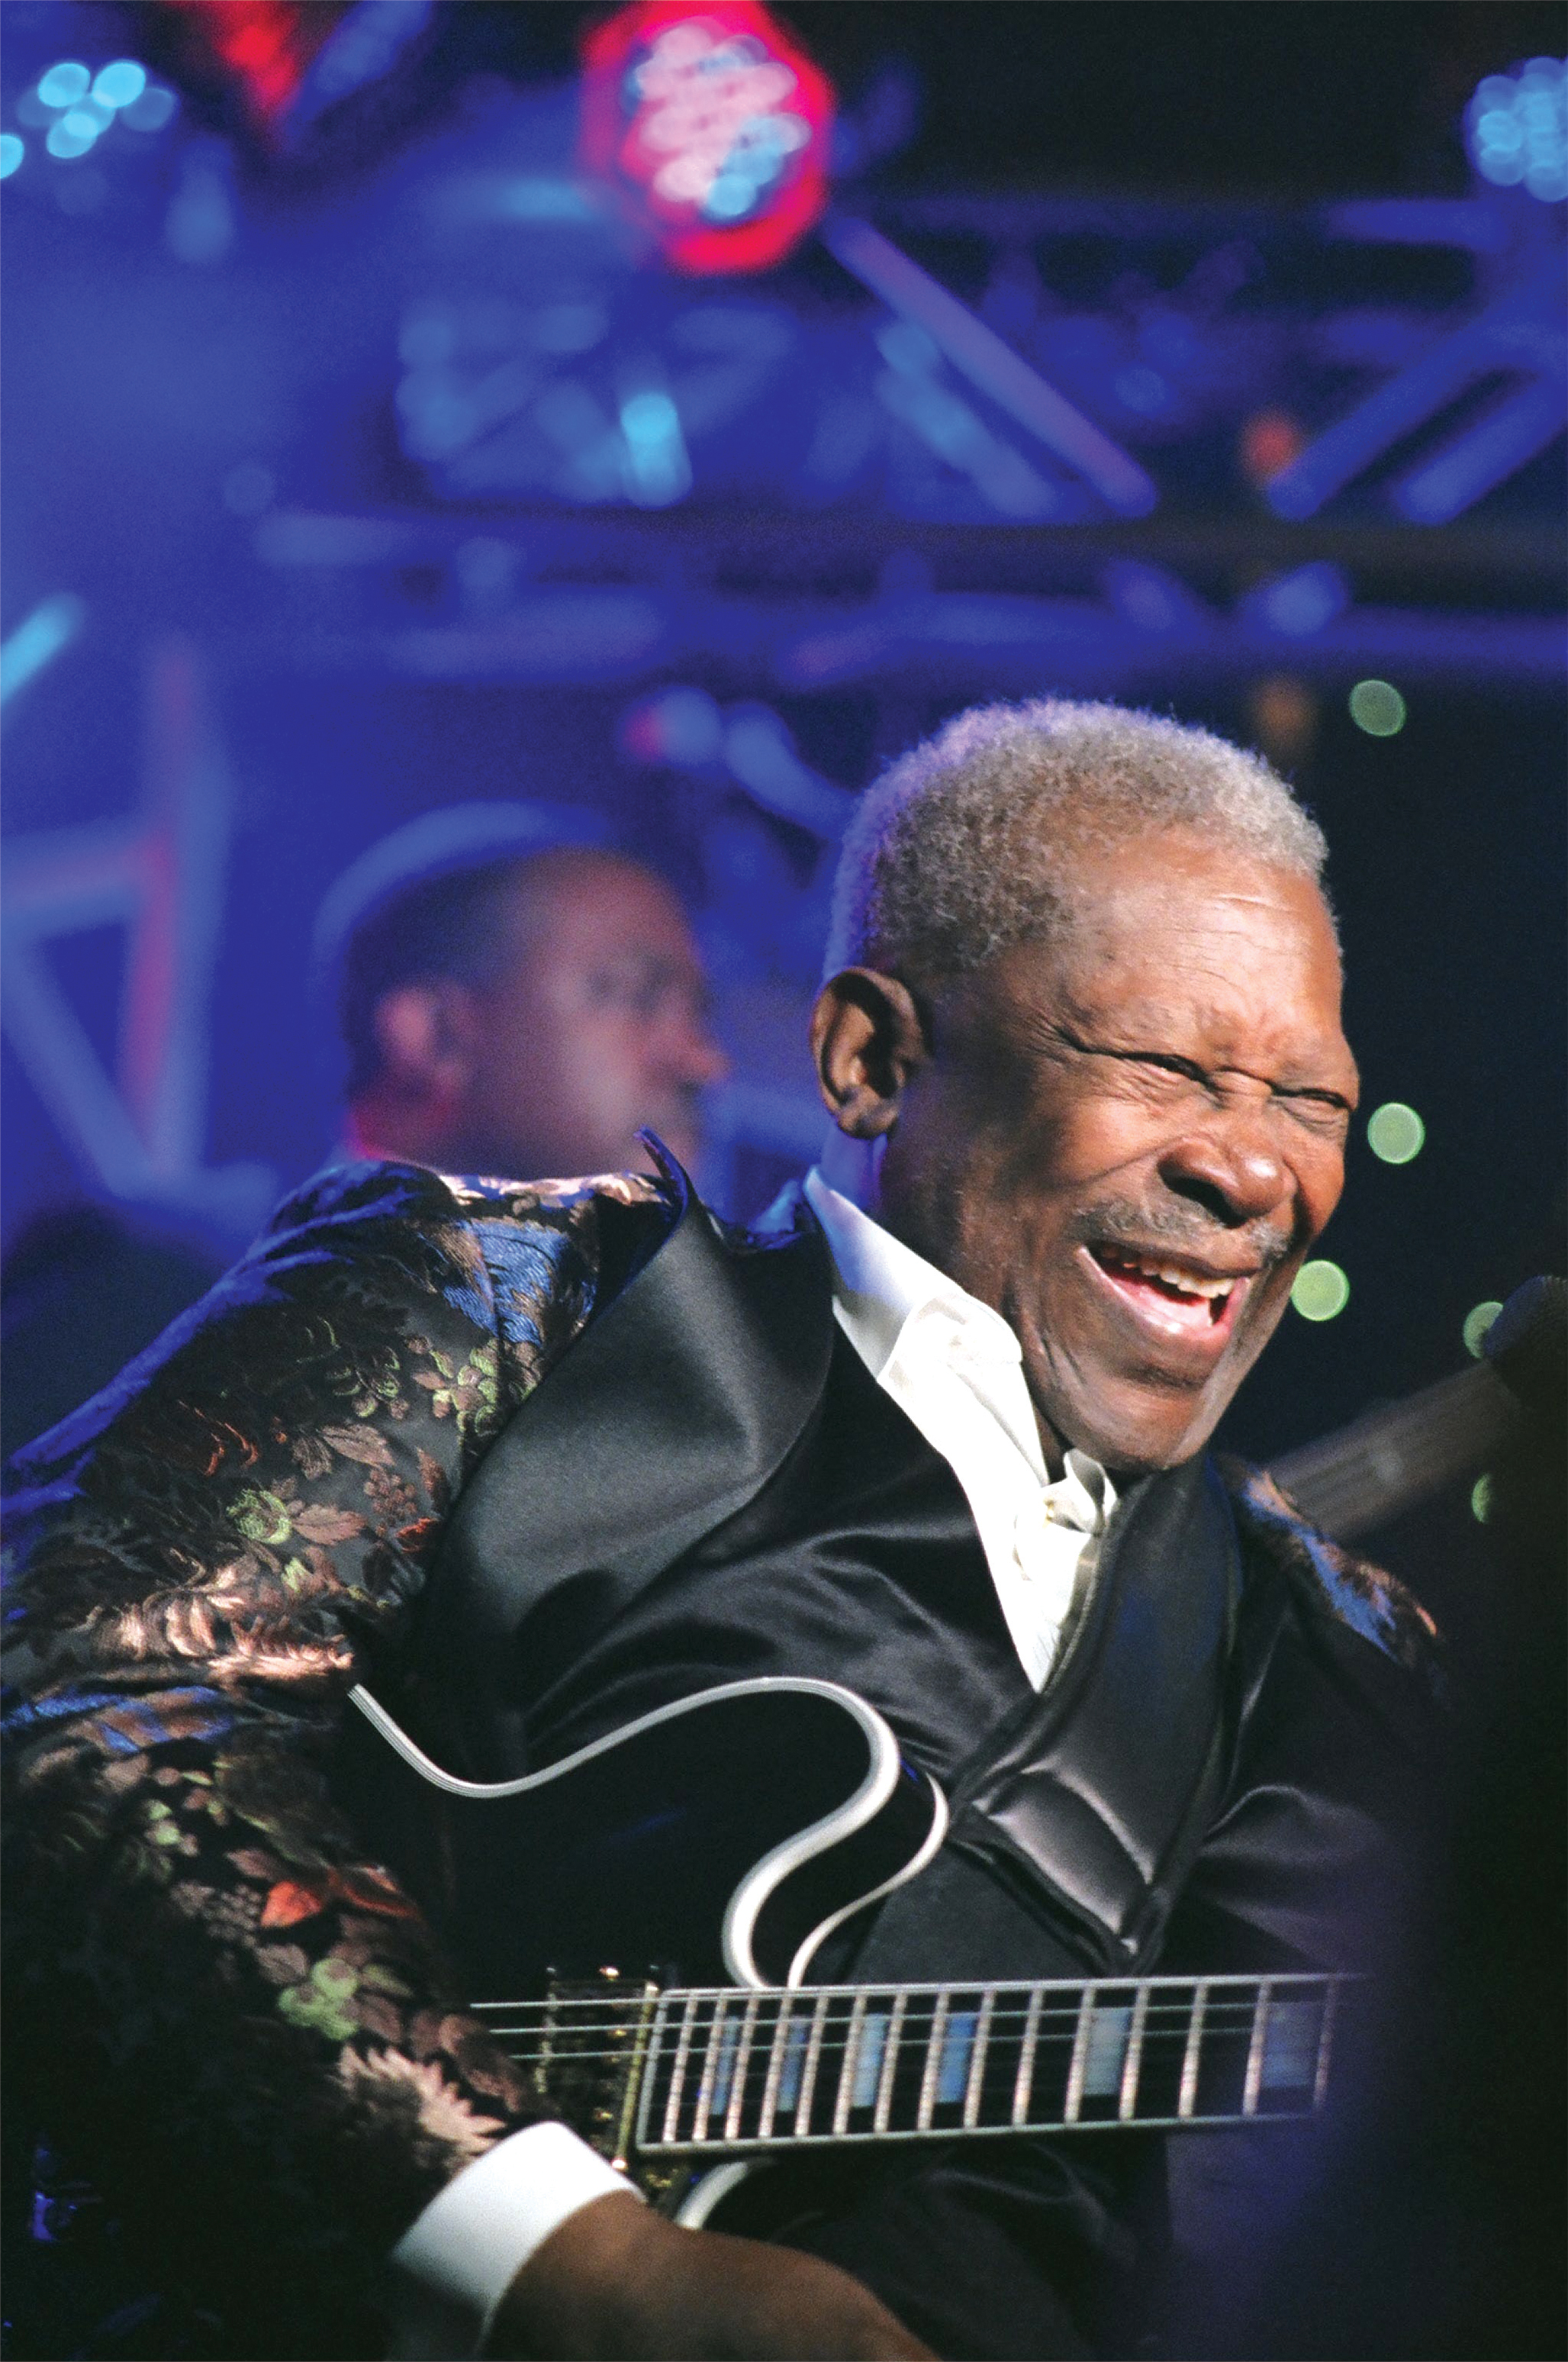 Blues music legend B.B. King performs at Mississippi State in an Oct. 11 concert.